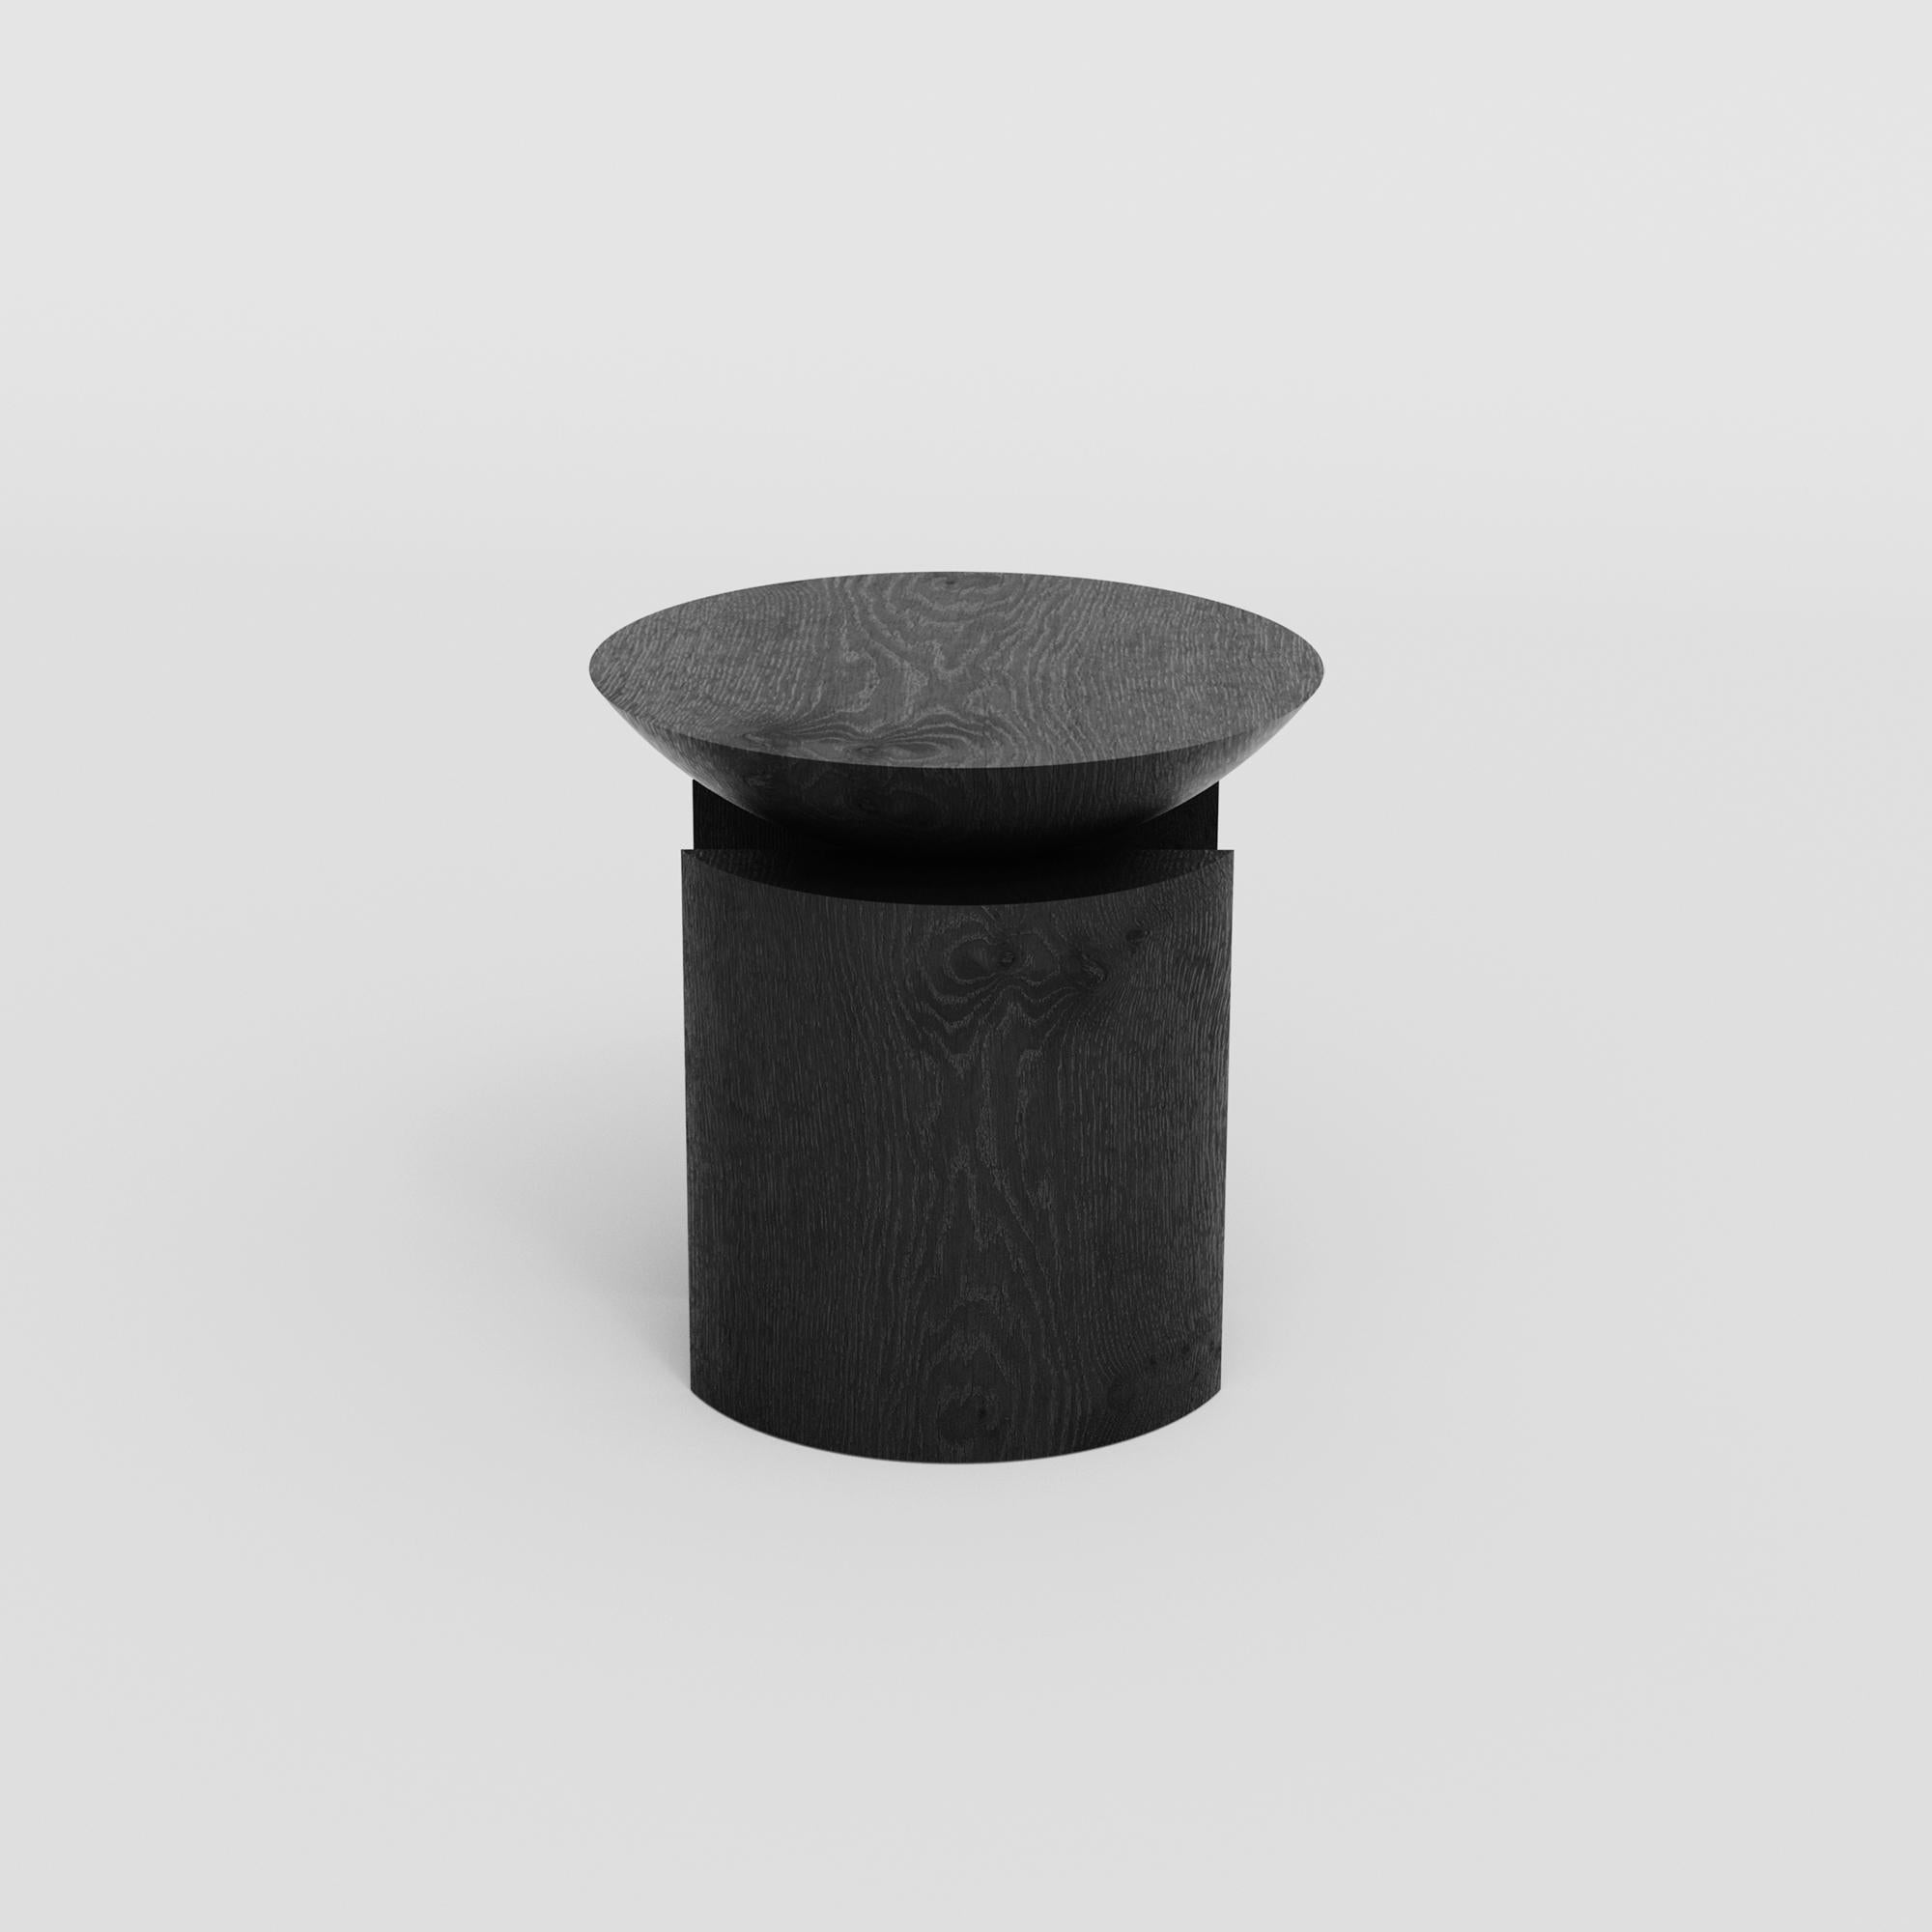 Hand-Crafted Anca Alta Sculptural Side Table/Stool Tropical Hardwood by Pedro Paulo Venzon For Sale